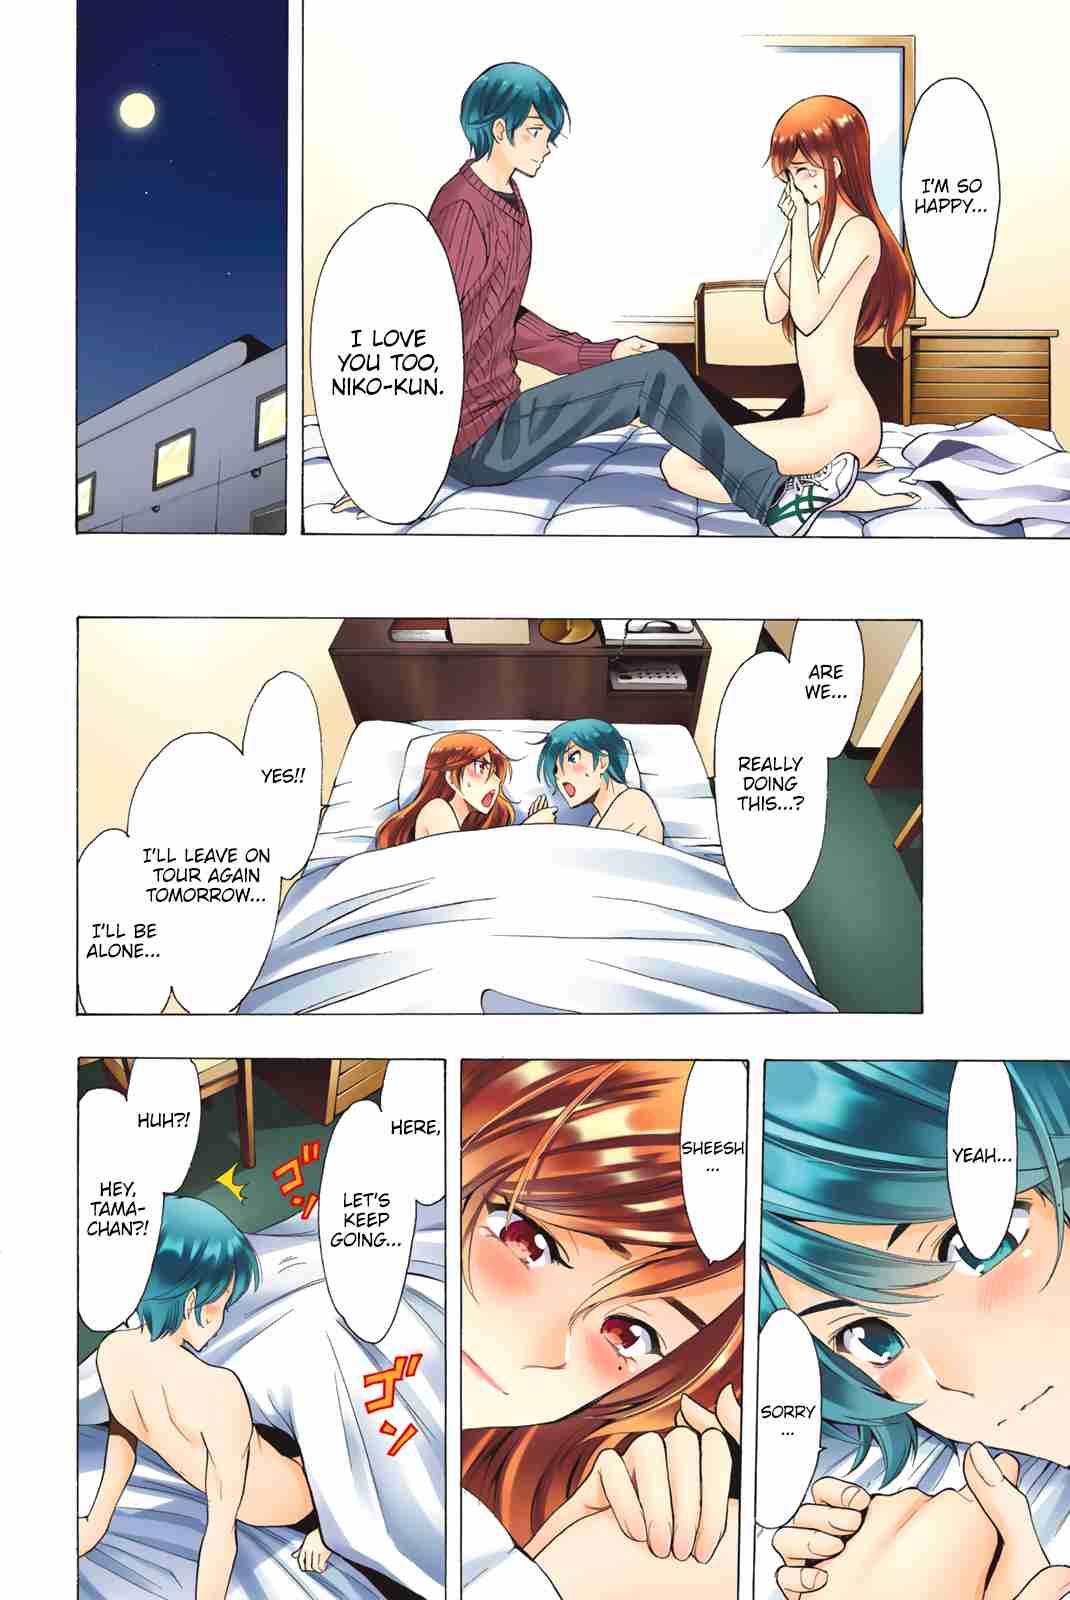 Fuuka Special Edition Vol. 1 Ch. 2 The Reply